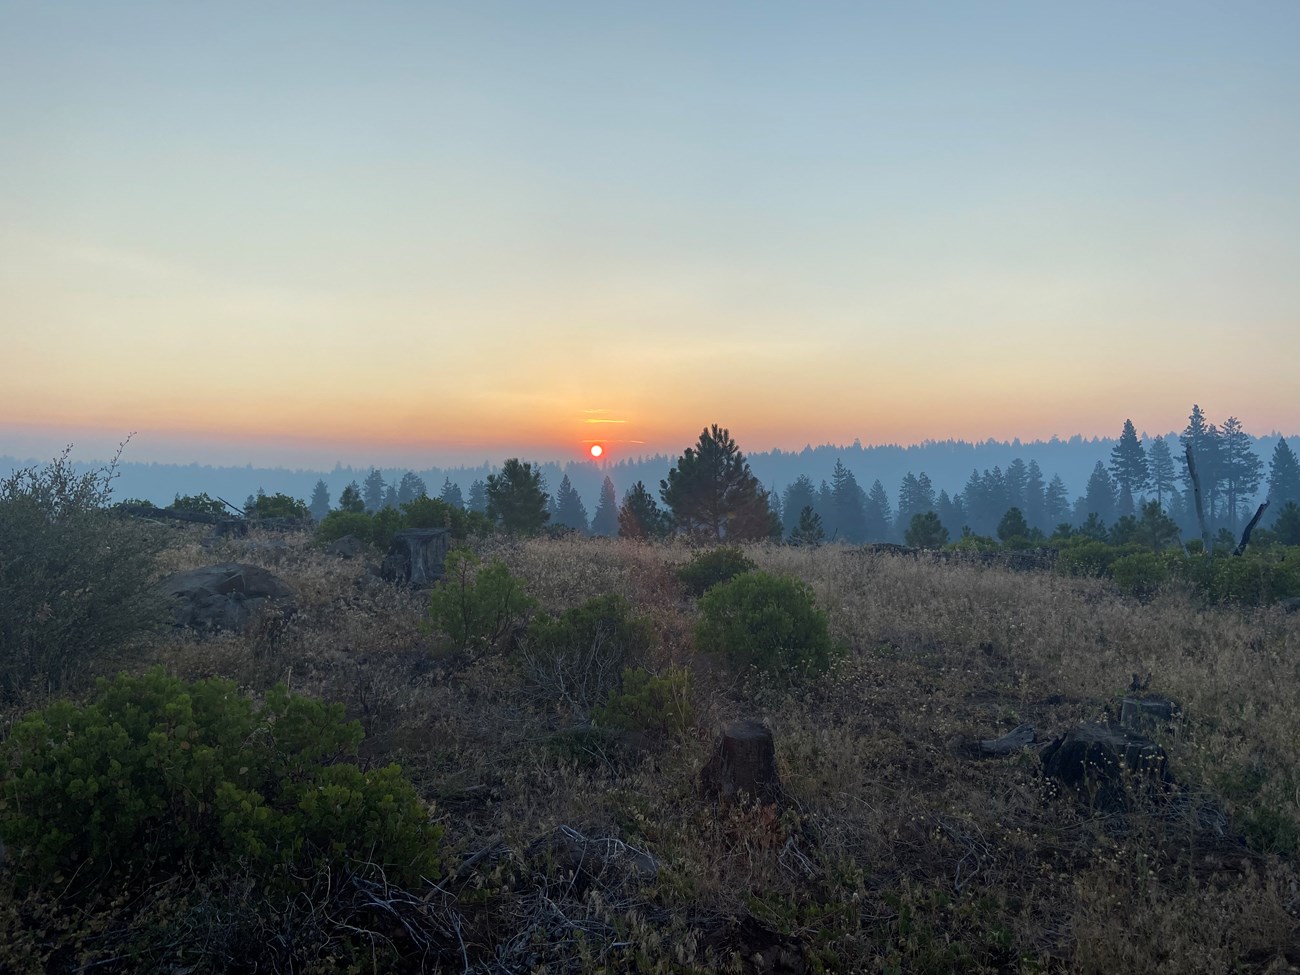 A deep orange sun sets over hazy bluish treelines, viewed from a dry, grass- and shrub-covered ridge.